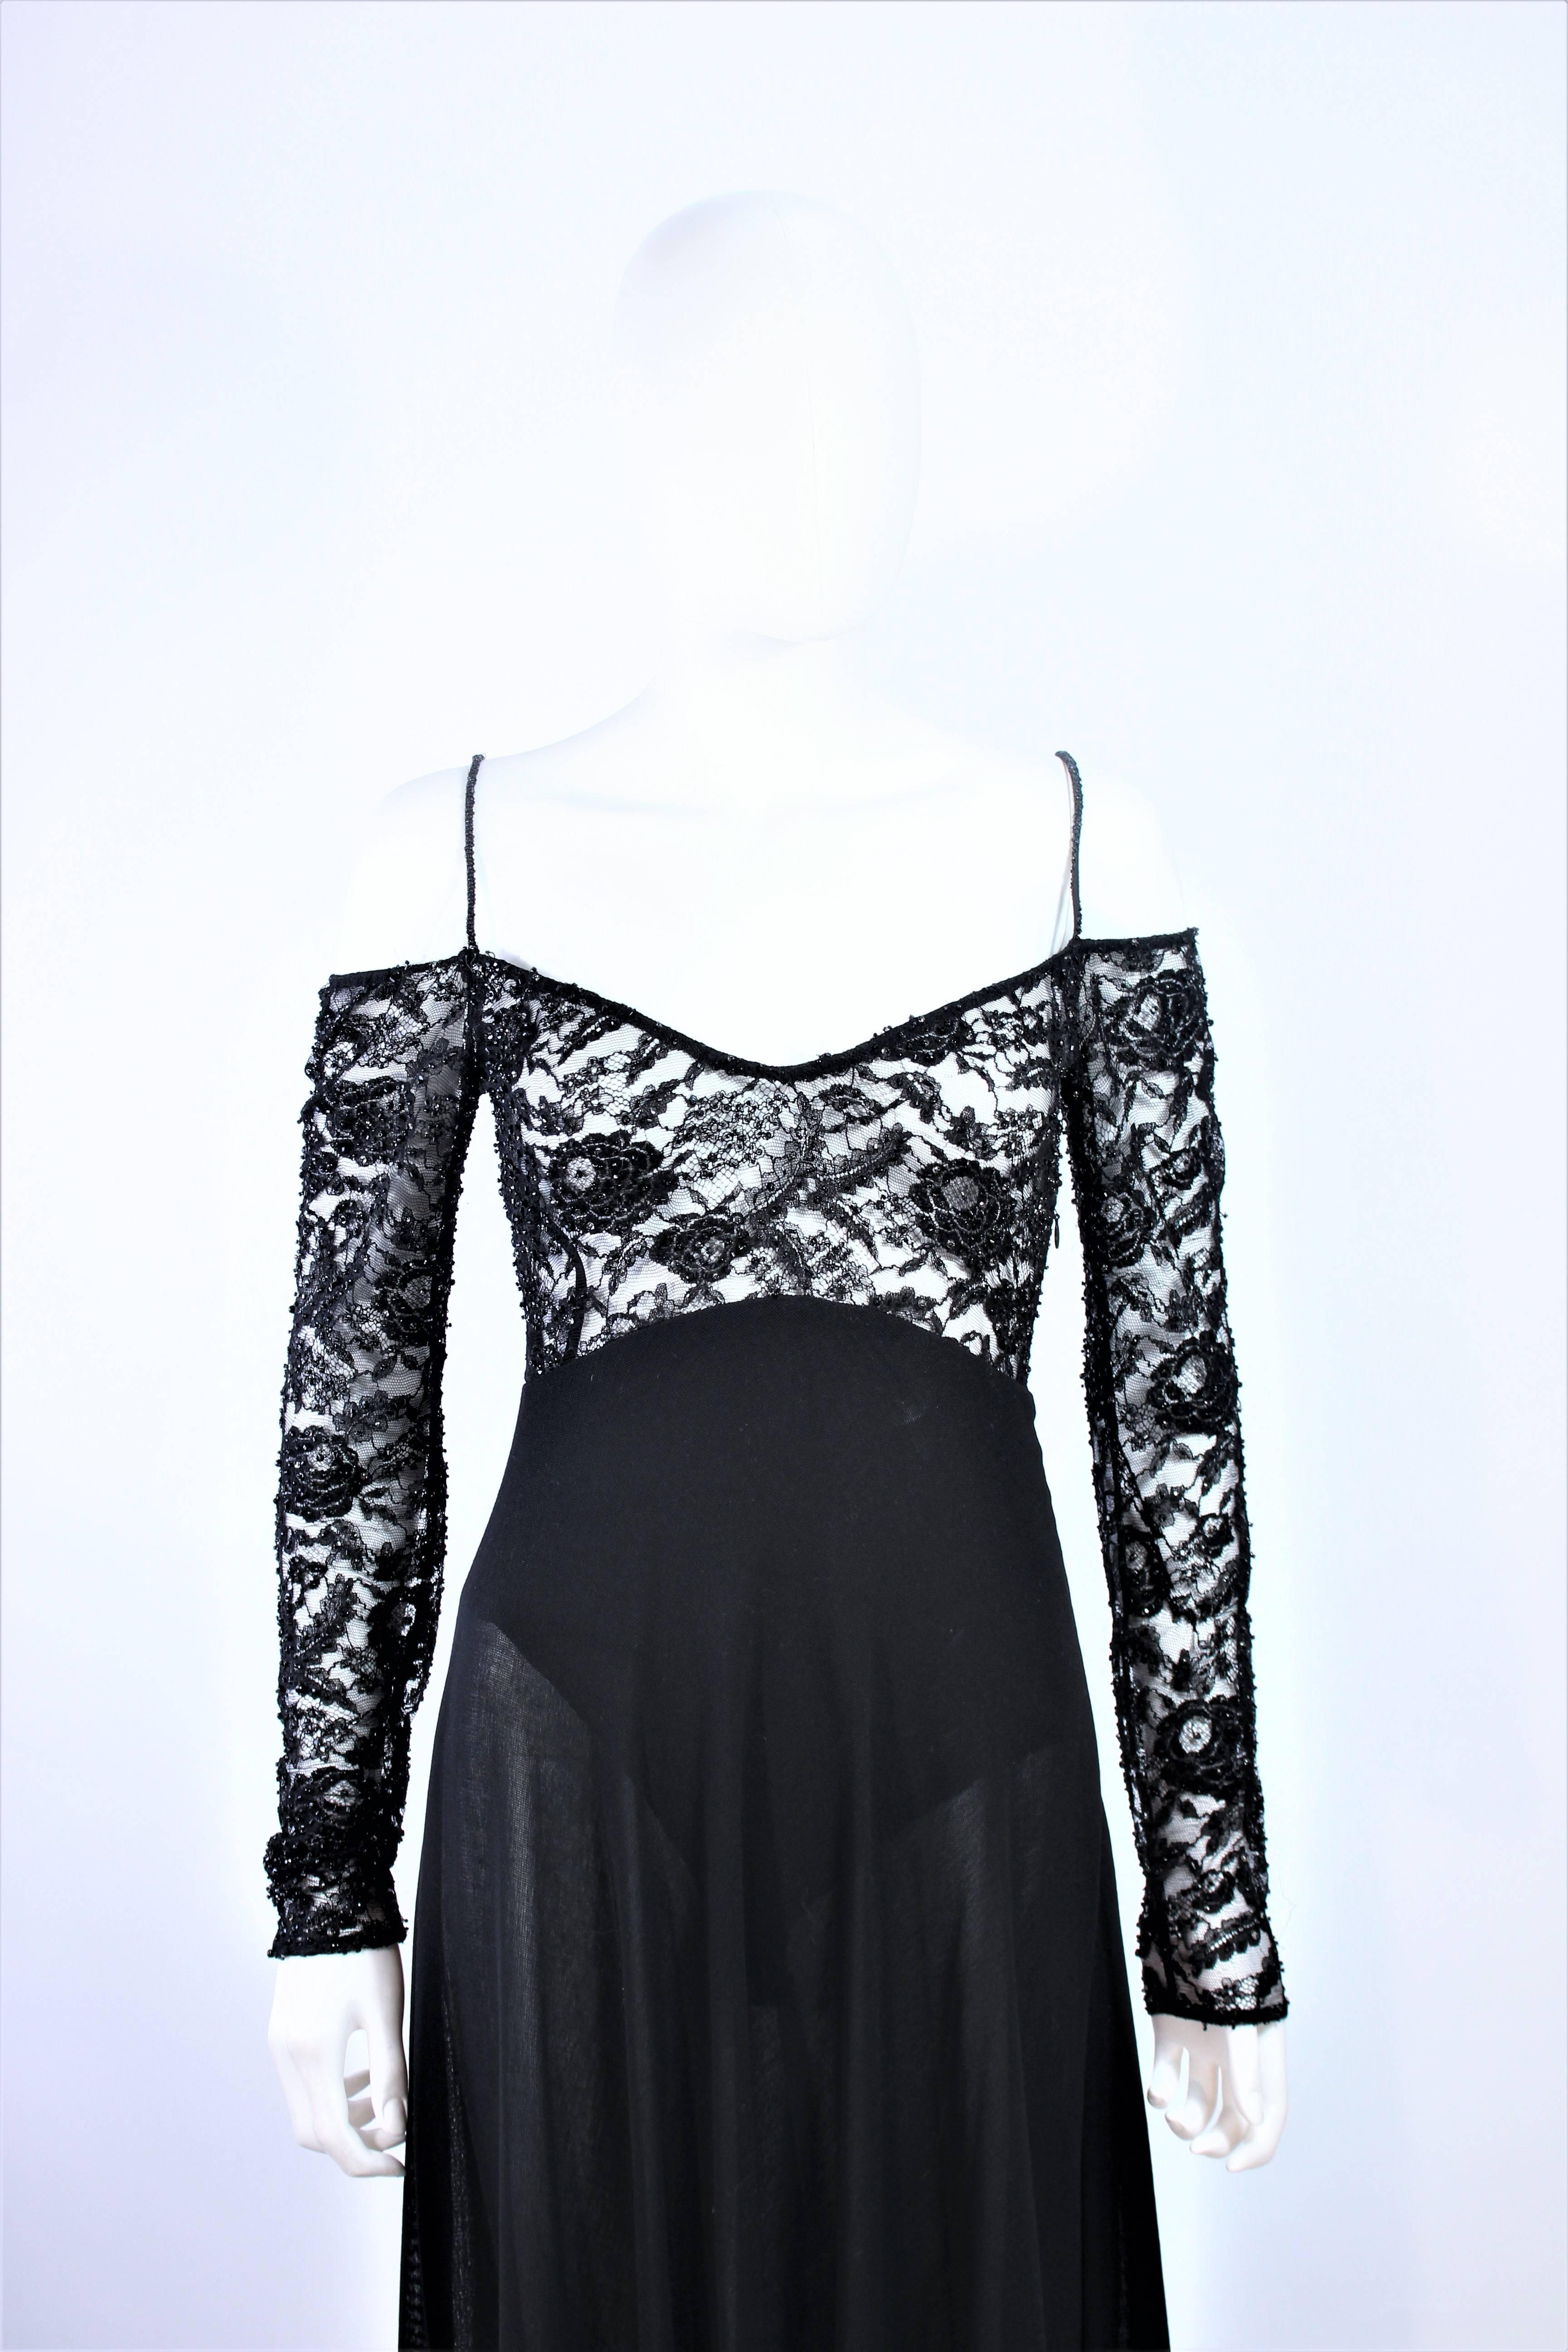 This Donna Karan gown is composed of a black jersey with lace bodice. Features an interior unitard with side zipper closure. In excellent vintage condition.

**Please cross-reference measurements for personal accuracy. Size in description box is